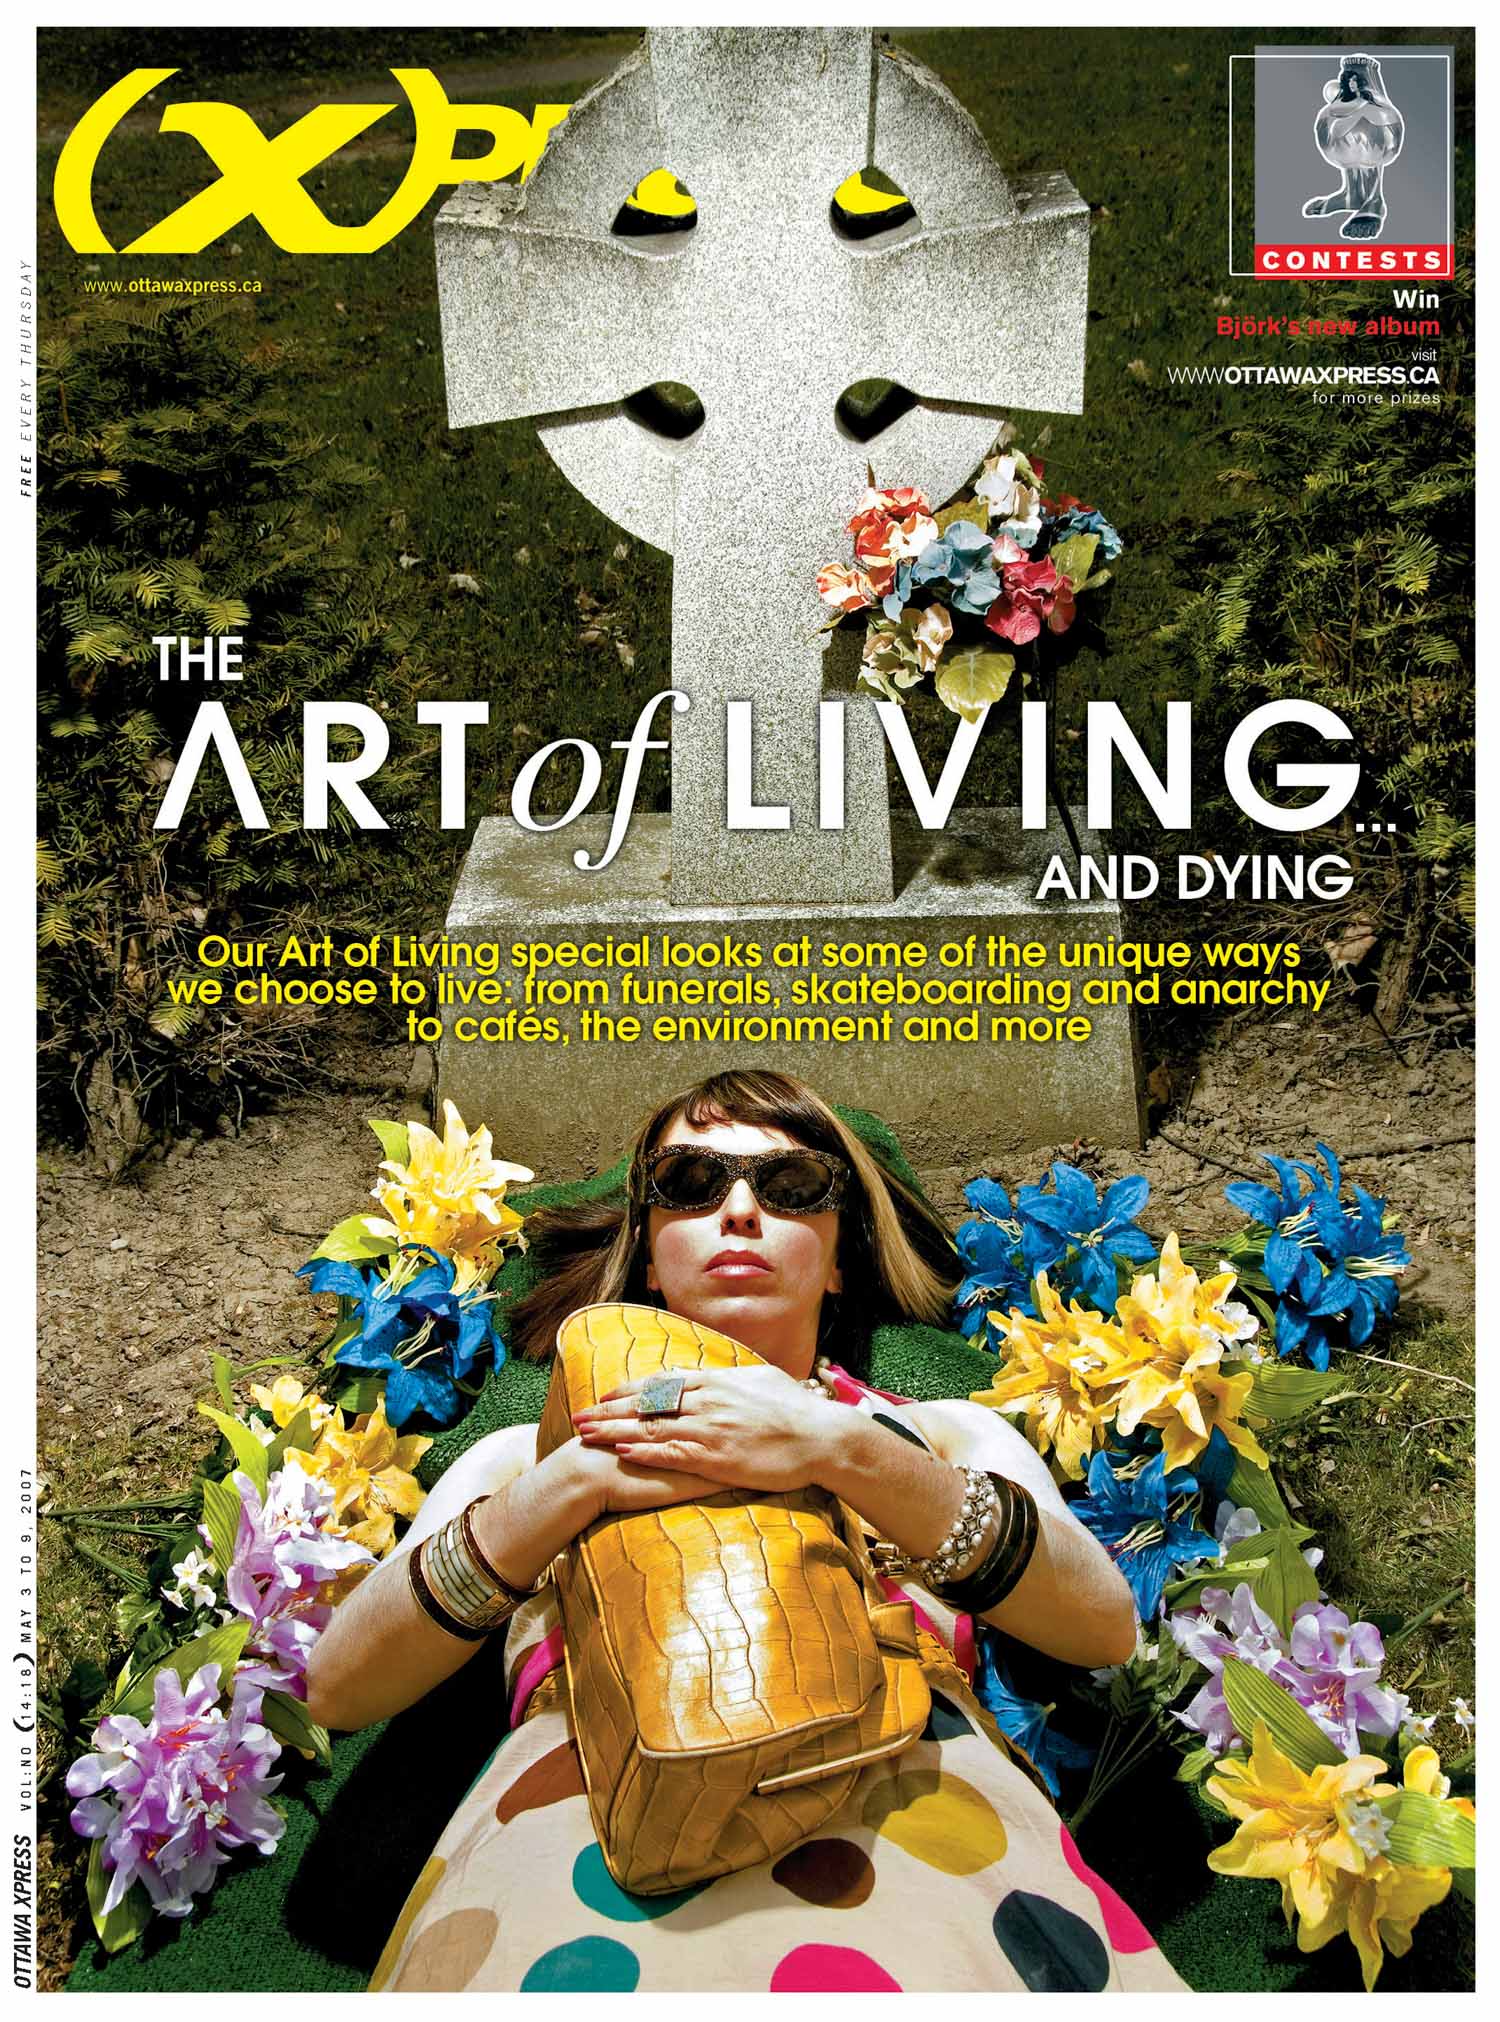 The Art of Living and Dying